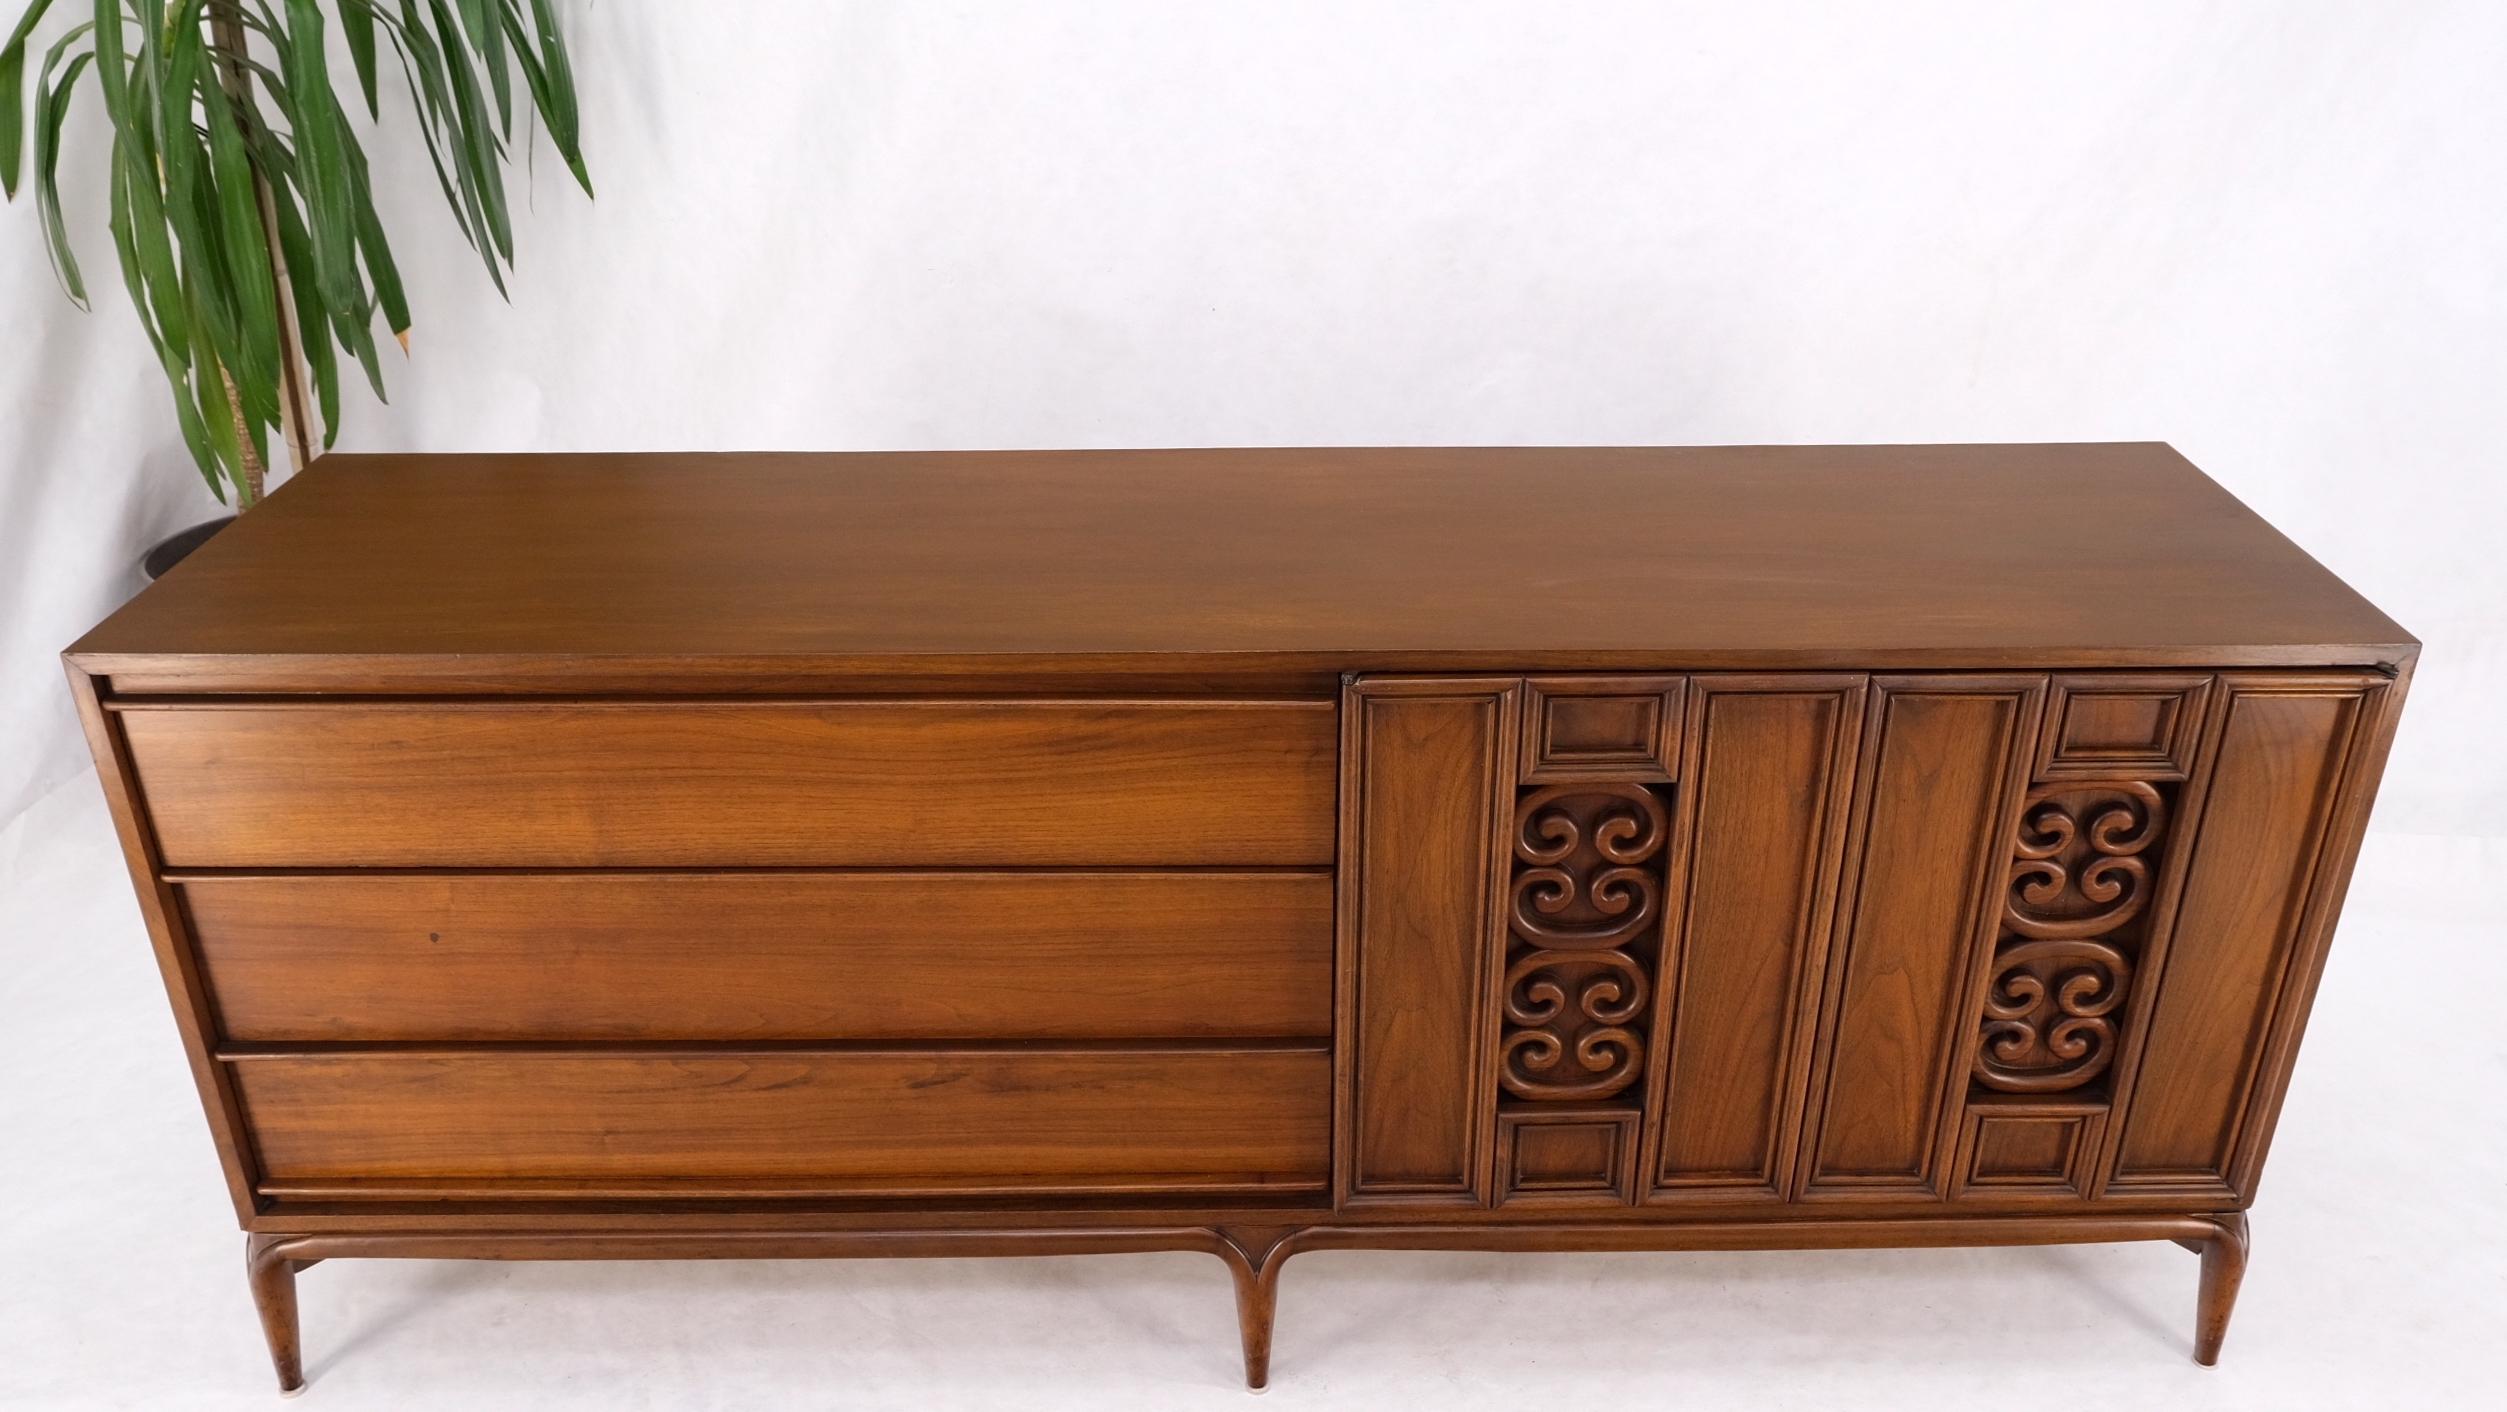 Danish Mid-Century Walnut 6 Drawers Long Credenza Dresser w/ Carved Double Doors For Sale 5